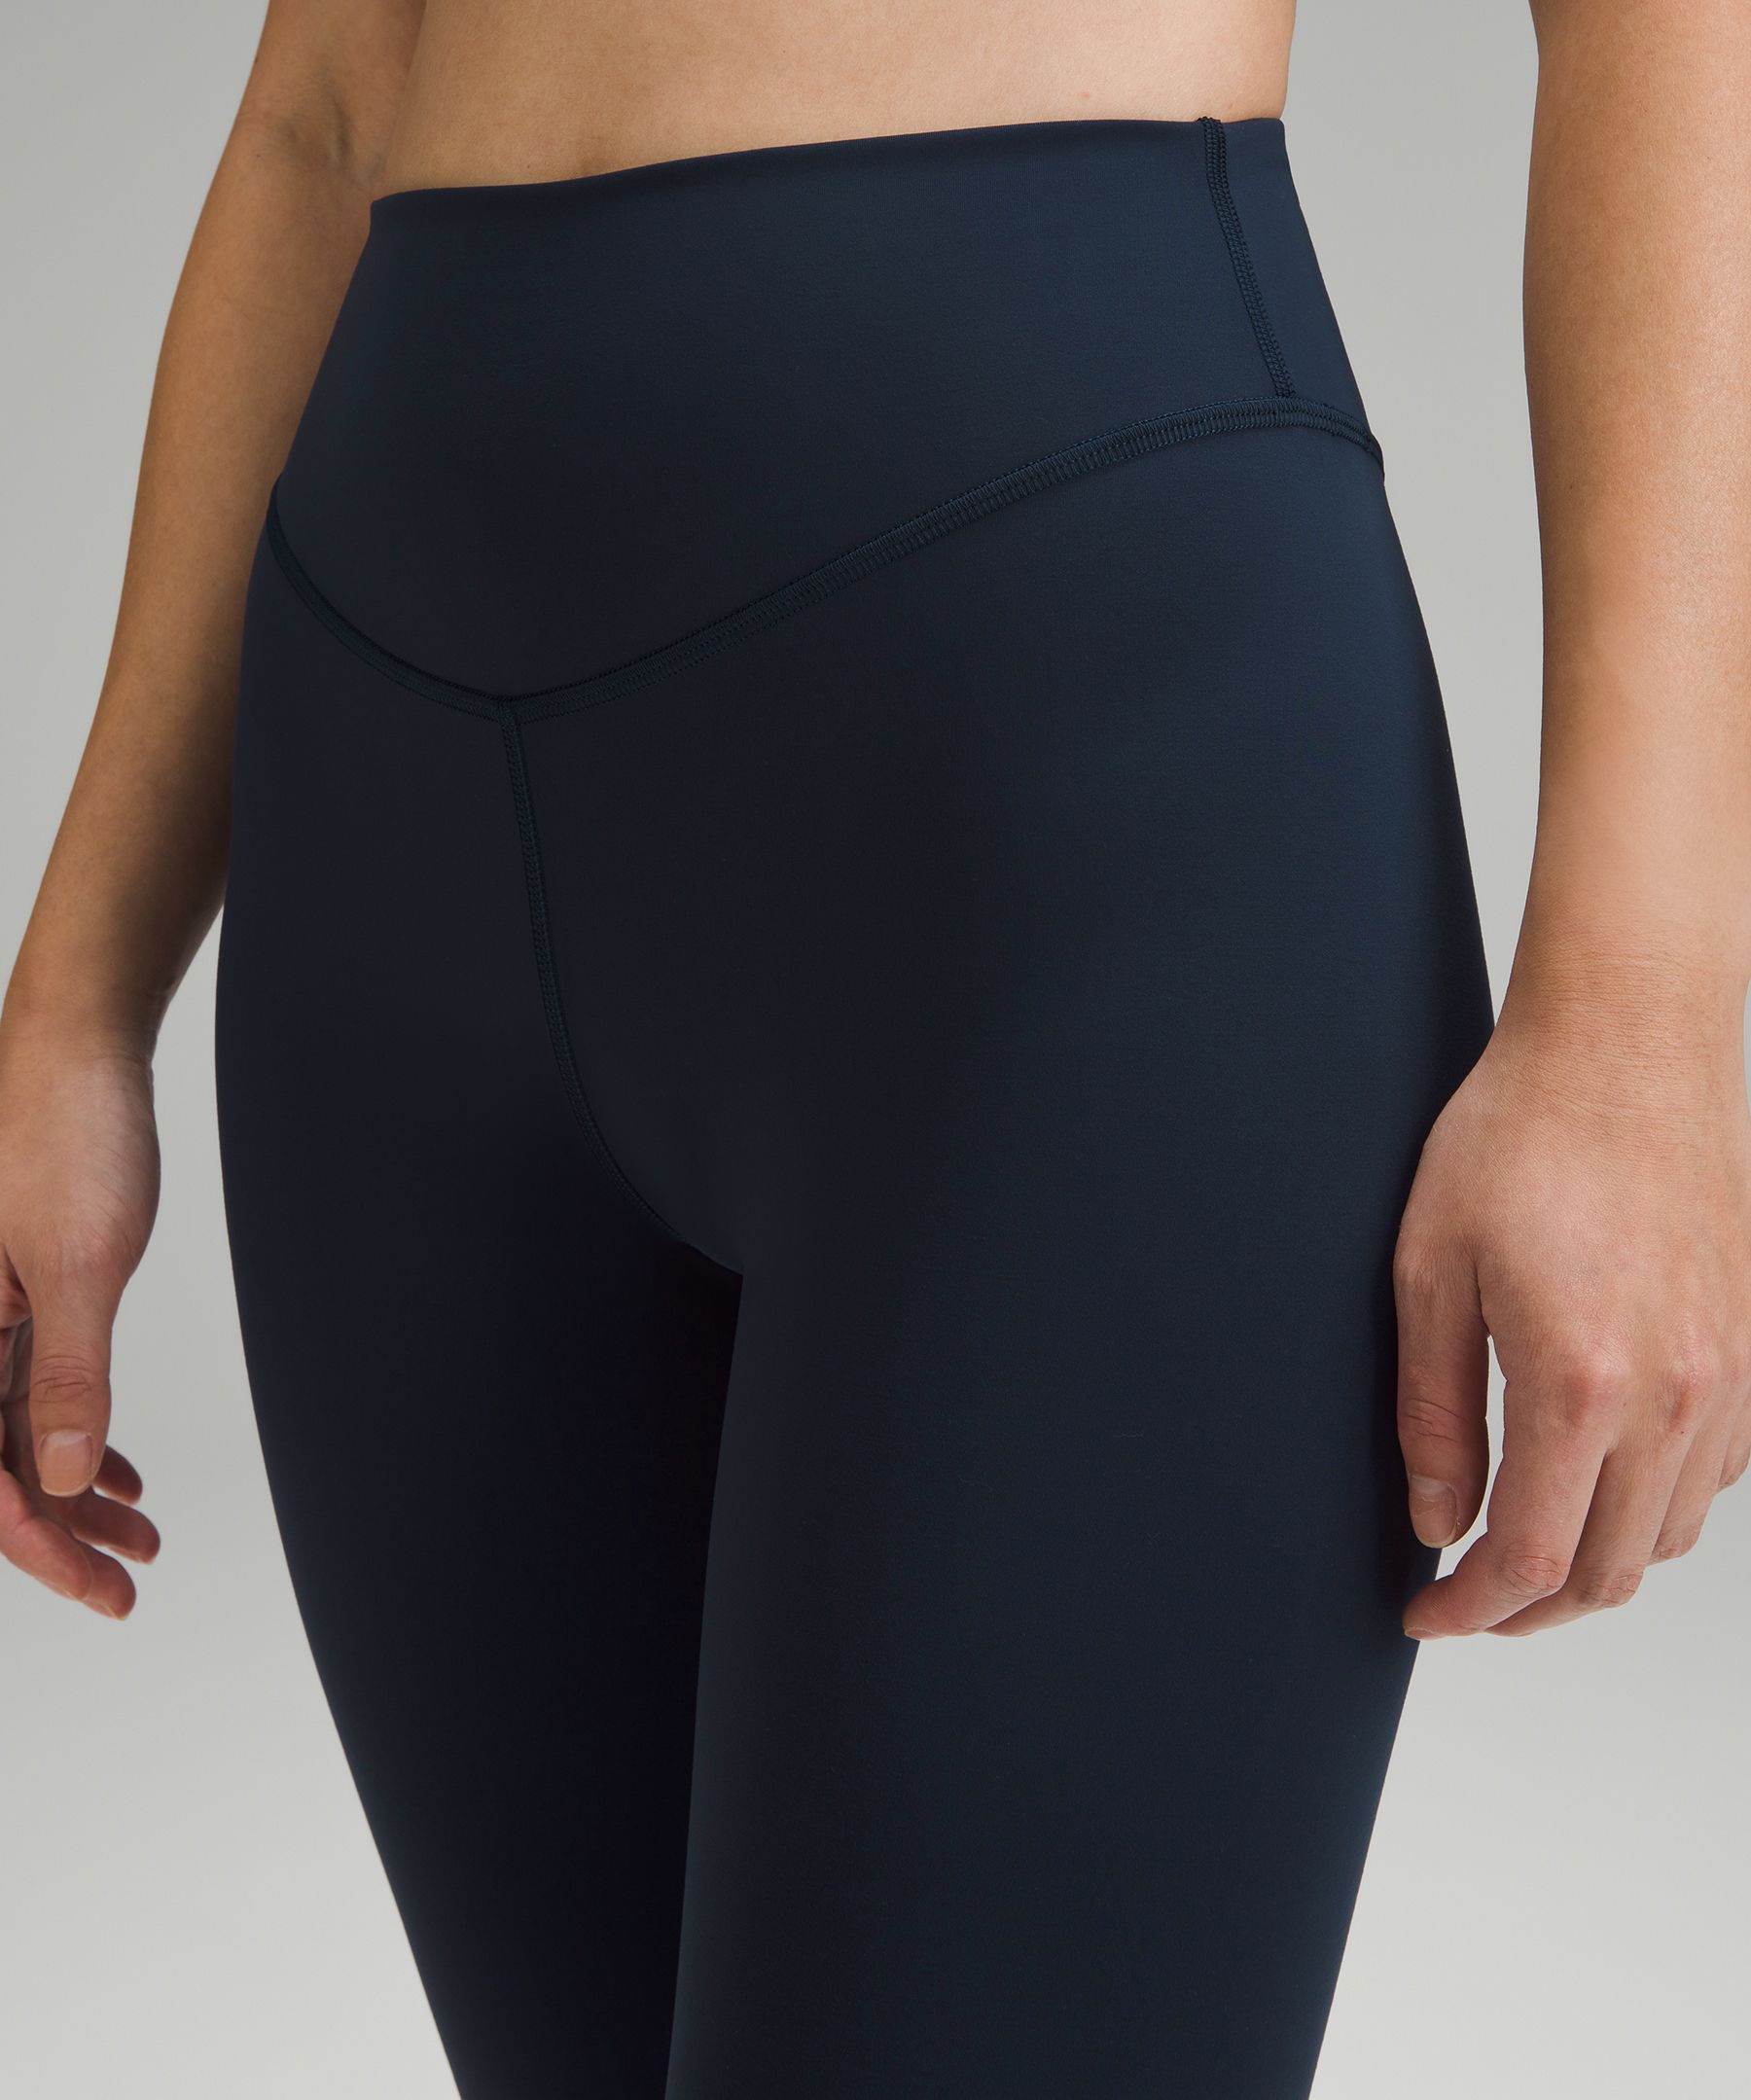 Wunder Under on the site right now from @lululemon 